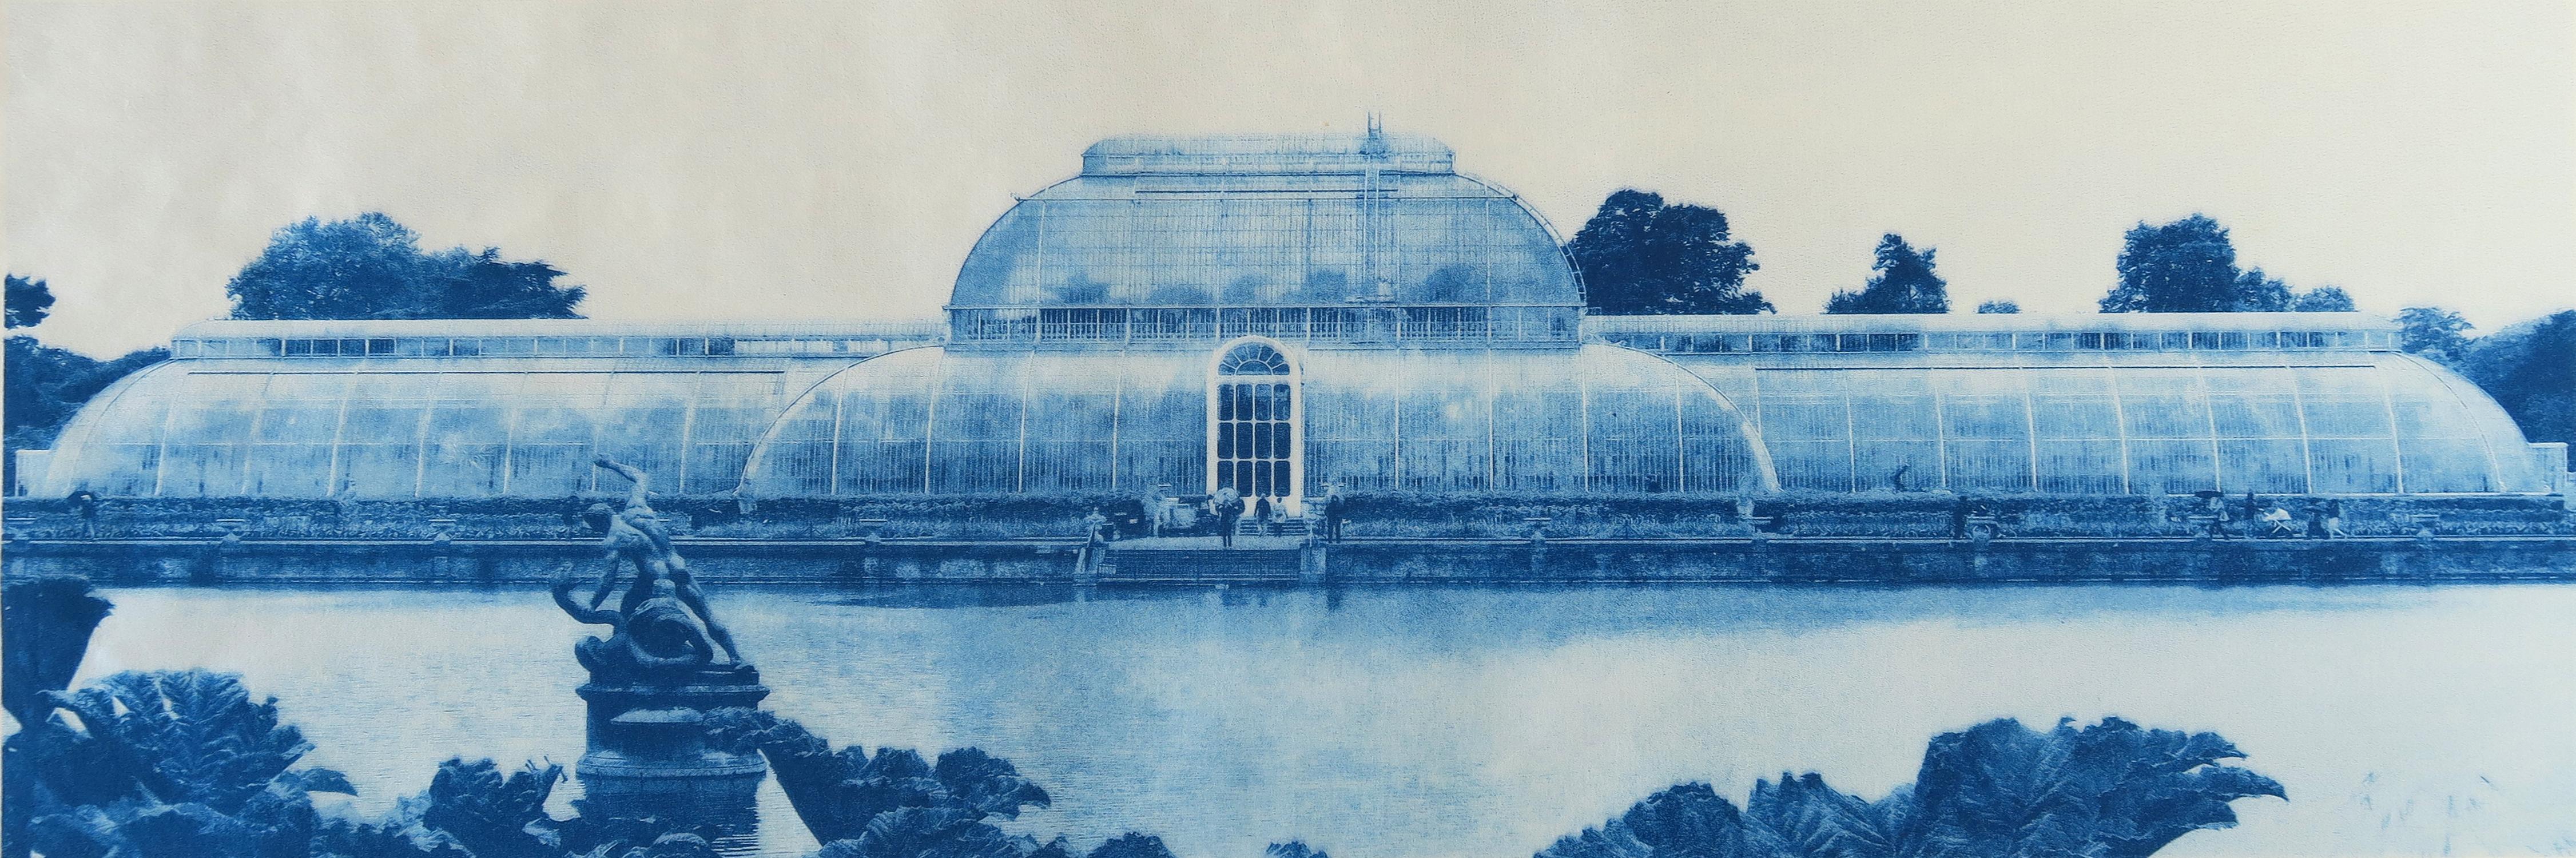 Penelope Stewart Landscape Photograph – Paradise at Kew Gardens, hand printed photo lithography on Japanese paper 2018, 